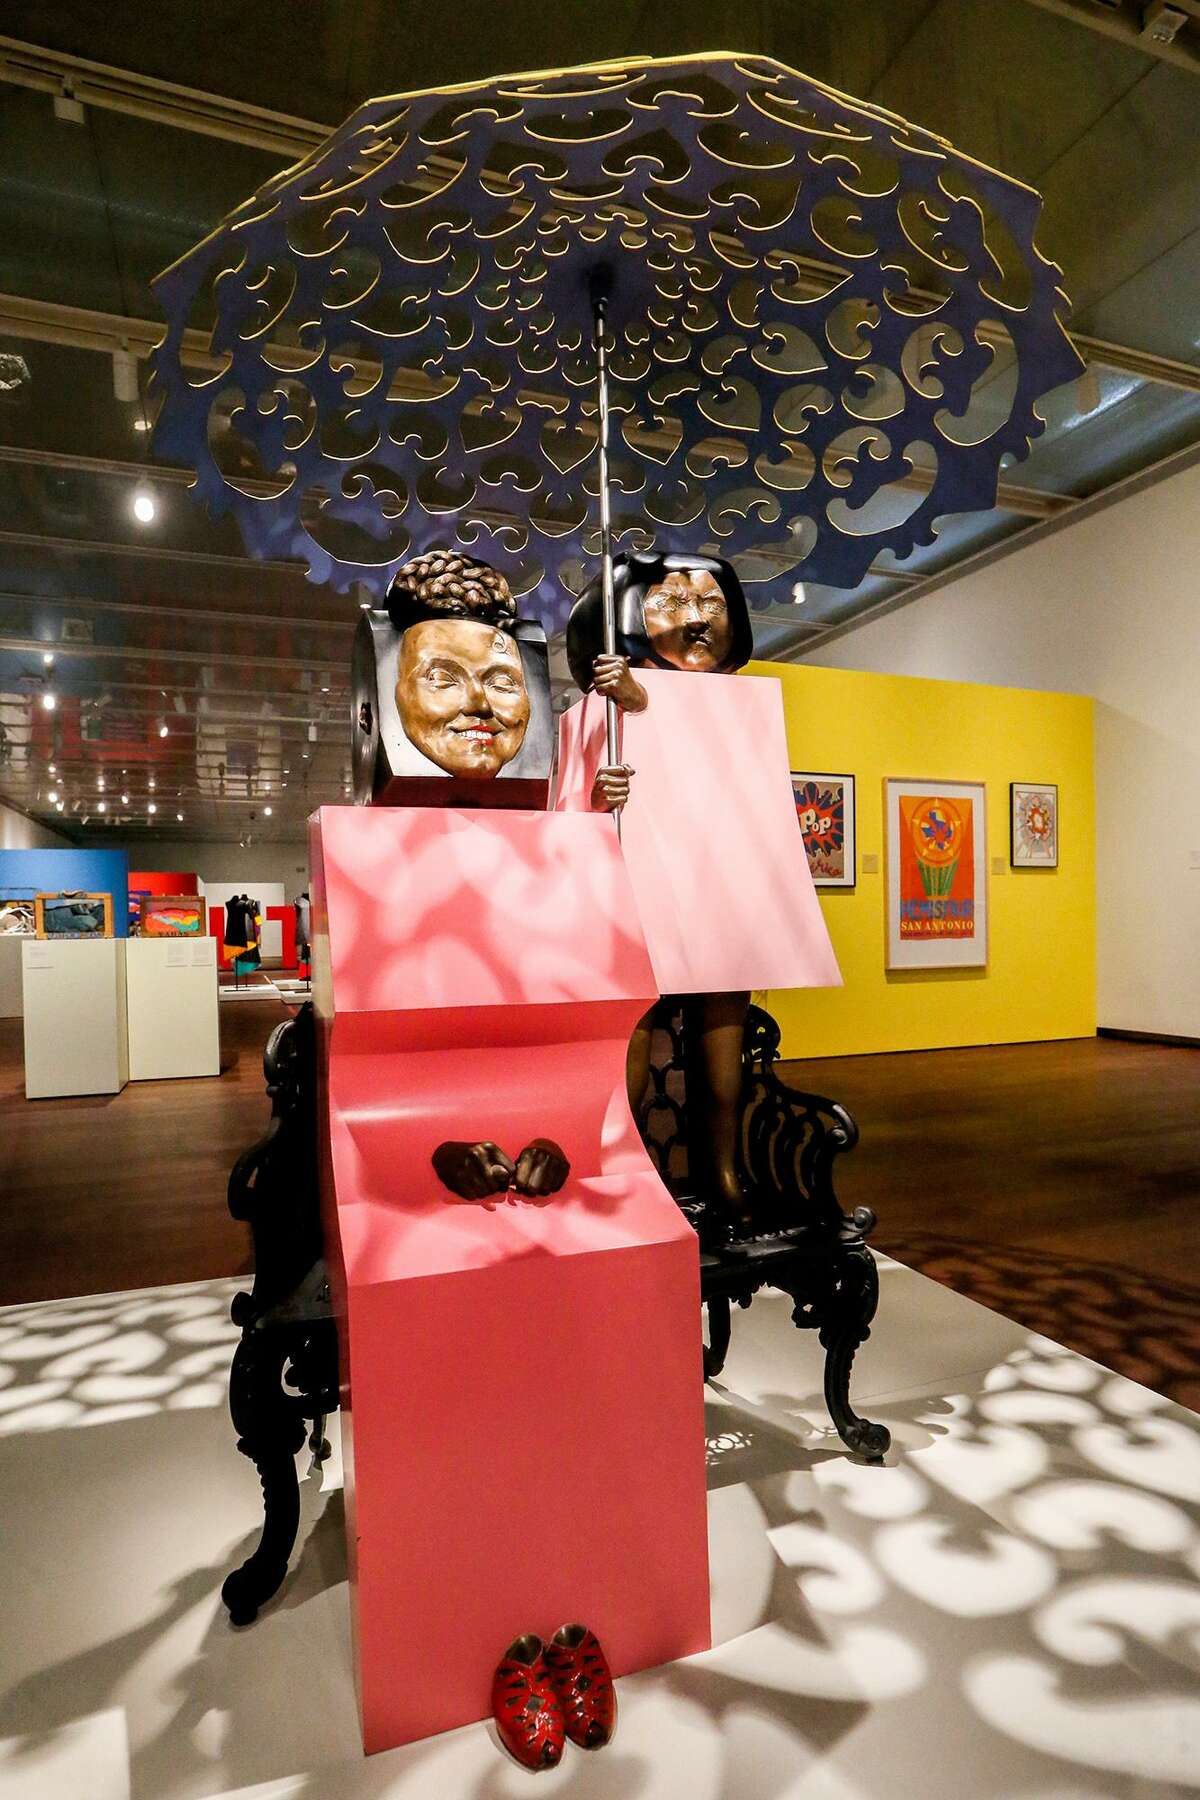 A steel and aluminum sculpture by Marisol Escobar (known as Marisol) titled “Mi mama y yo” (”My Mother and I”) is among the works in “Pop America, 1965-1975.”